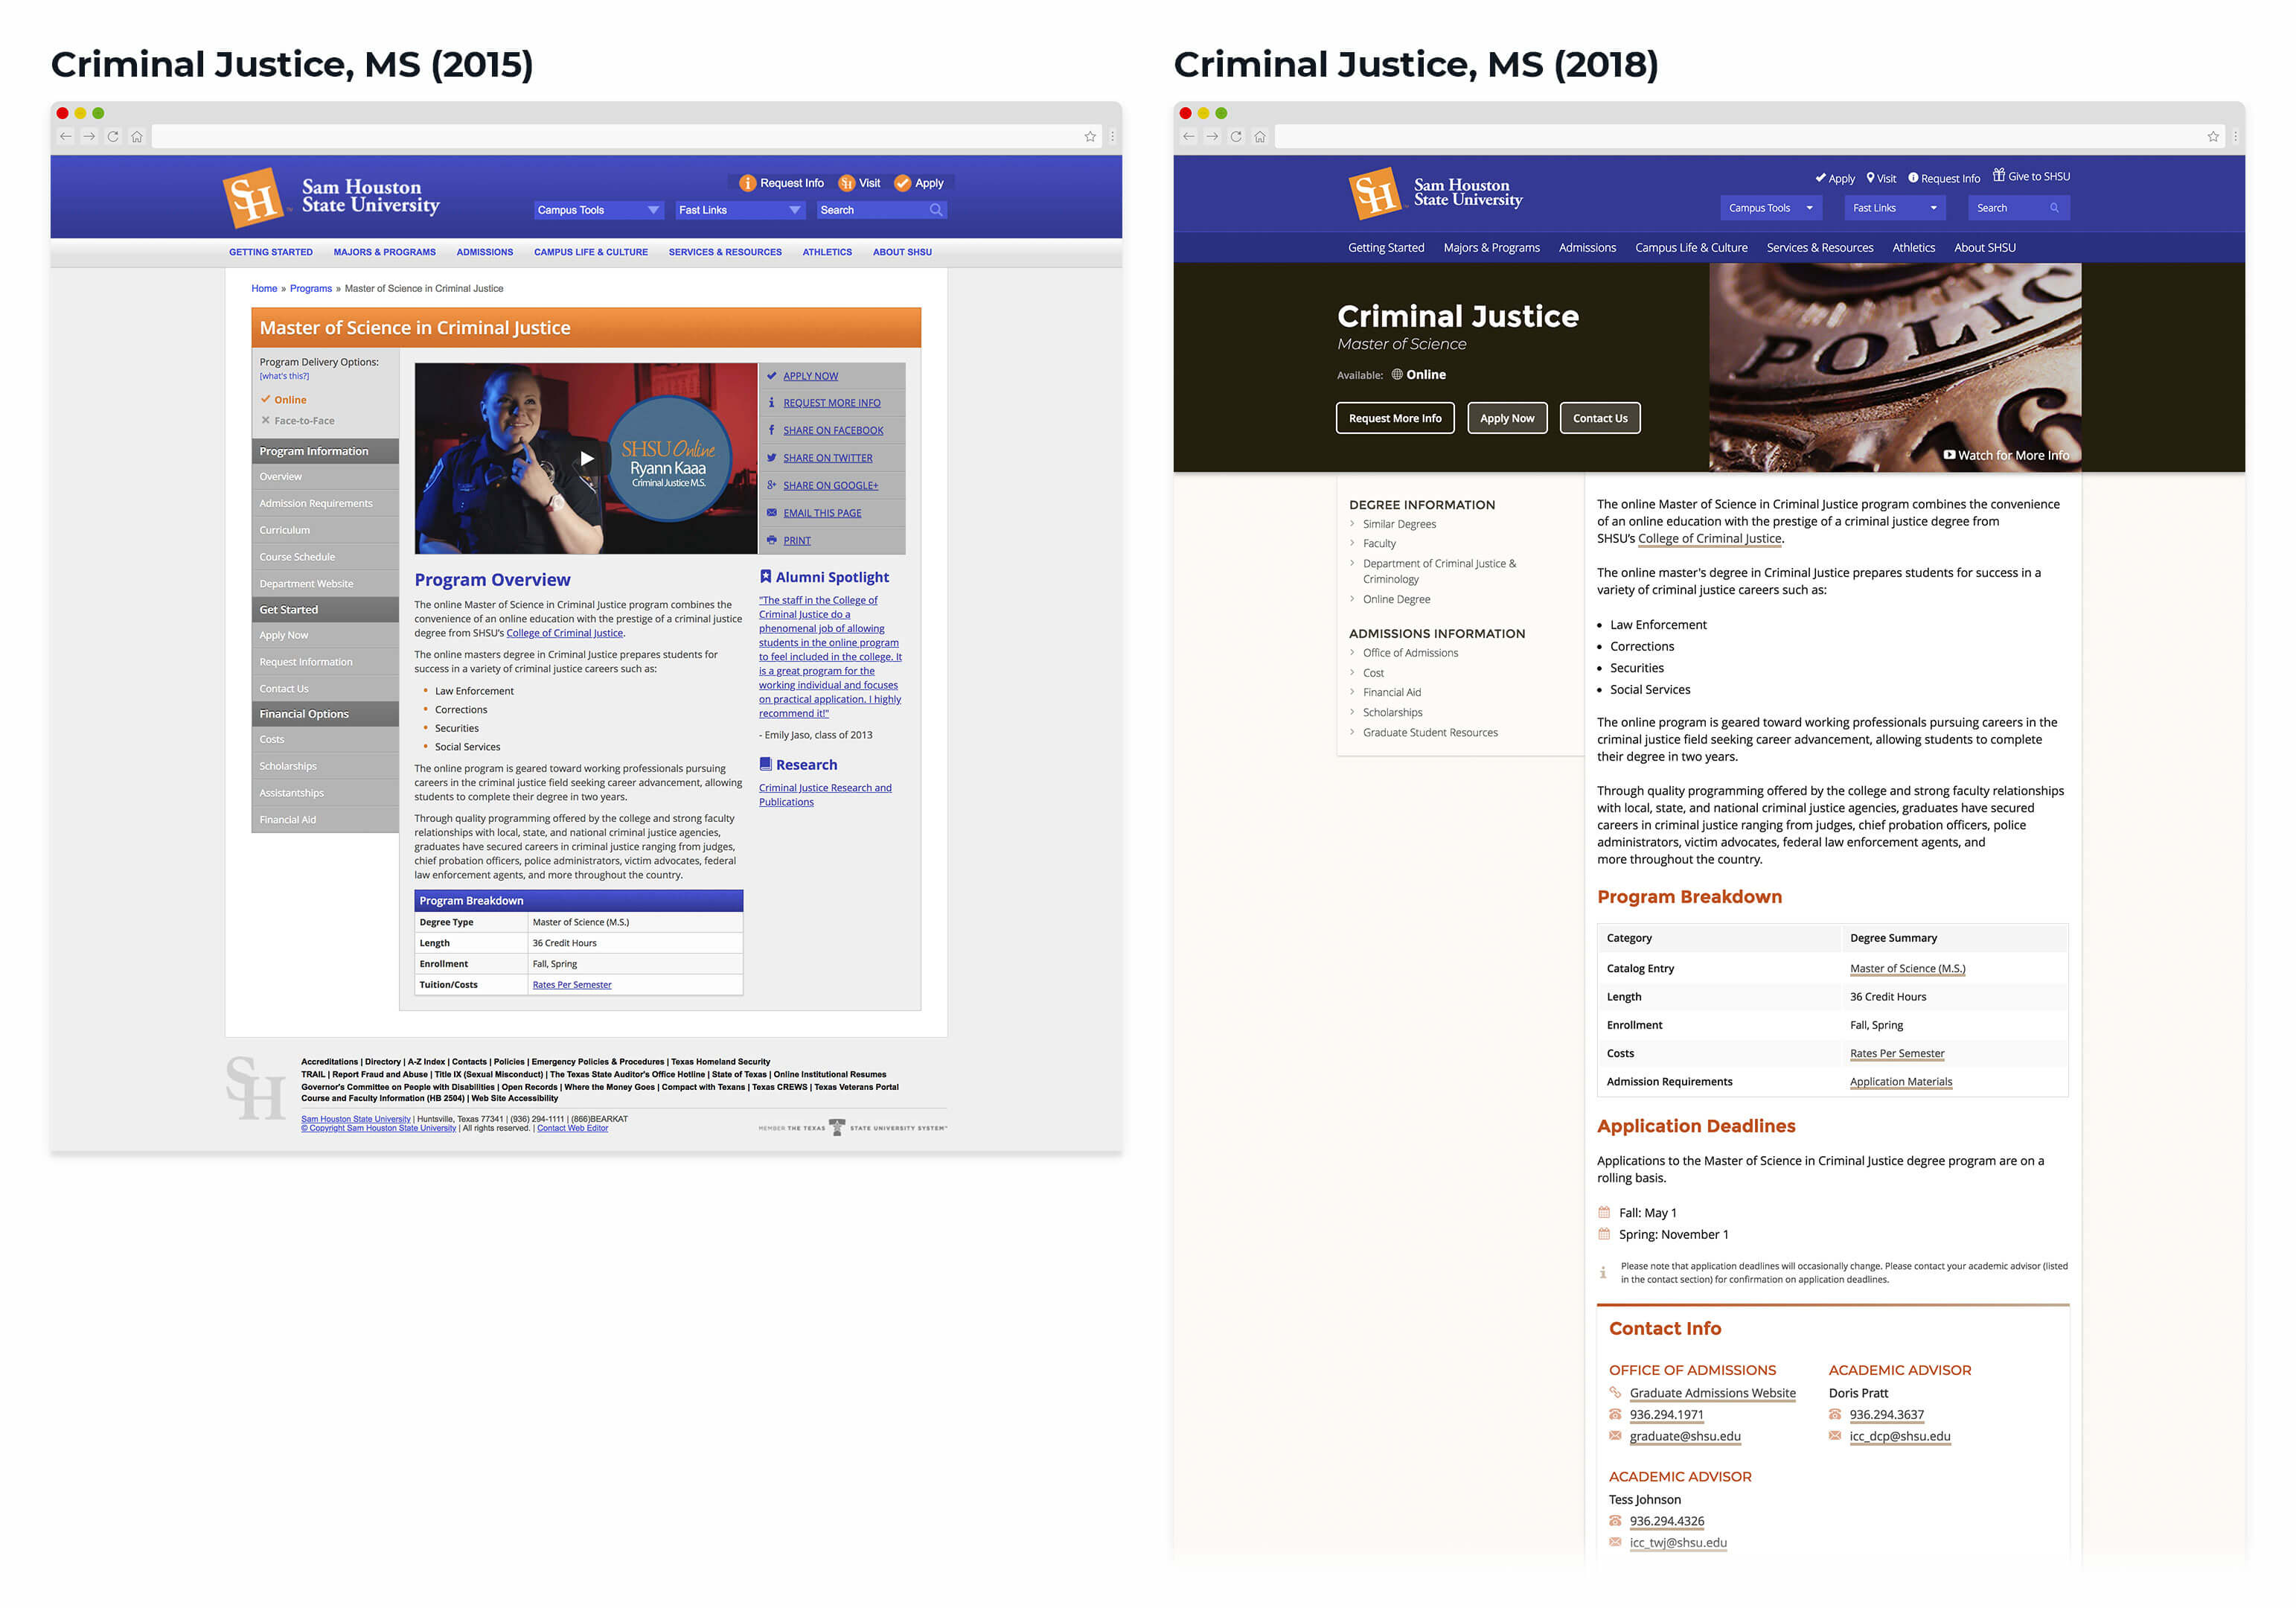 A side by side comparison of the previous PLP template from 2015 and the refreshed 2018 template.